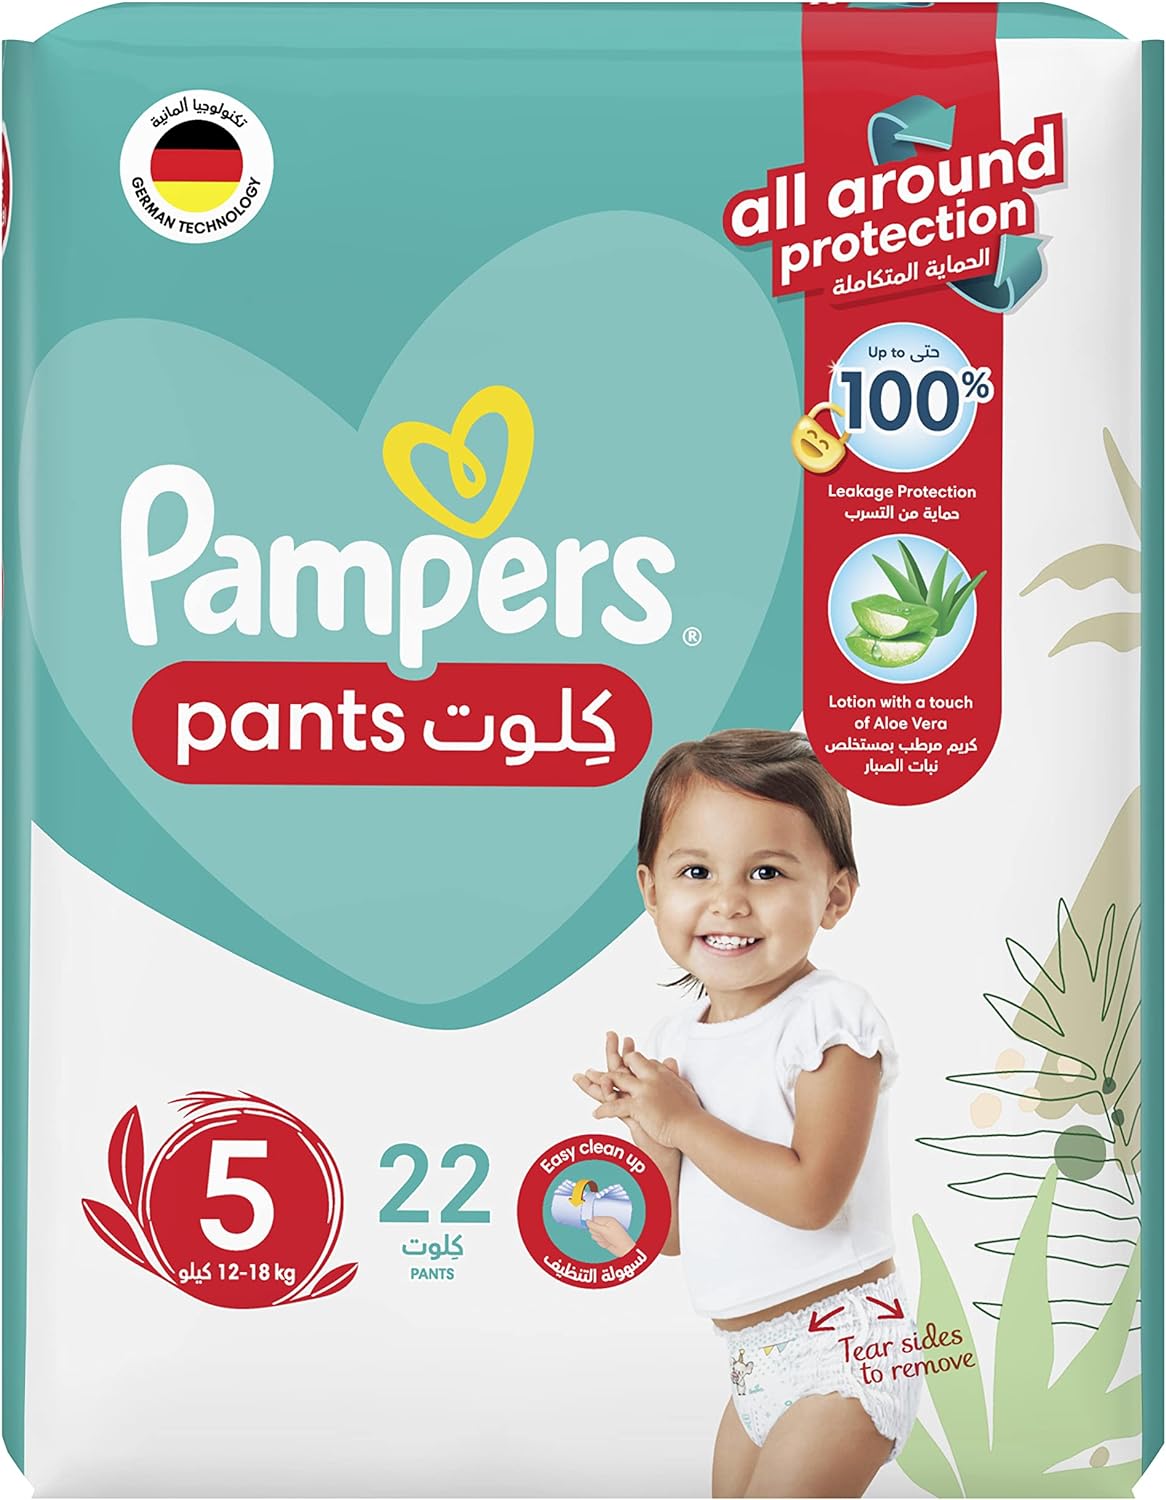 Pampers Baby-Dry Nappy Pants Size 8, 43 Nappies, 19kg+, Jumbo+ Pack